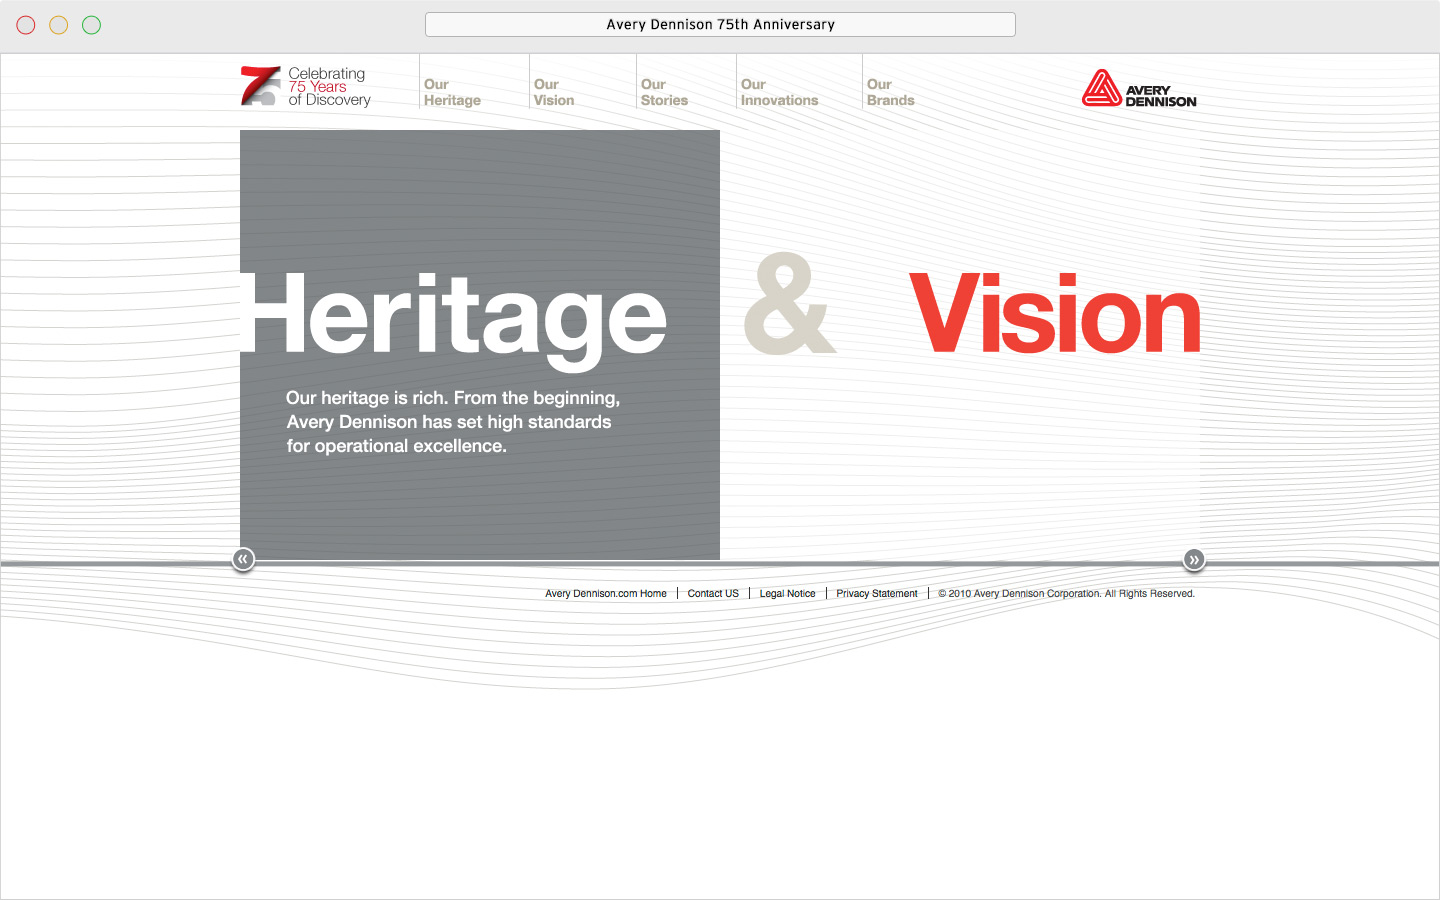 Avery Dennison 75th anniversary microsite homepage interaction